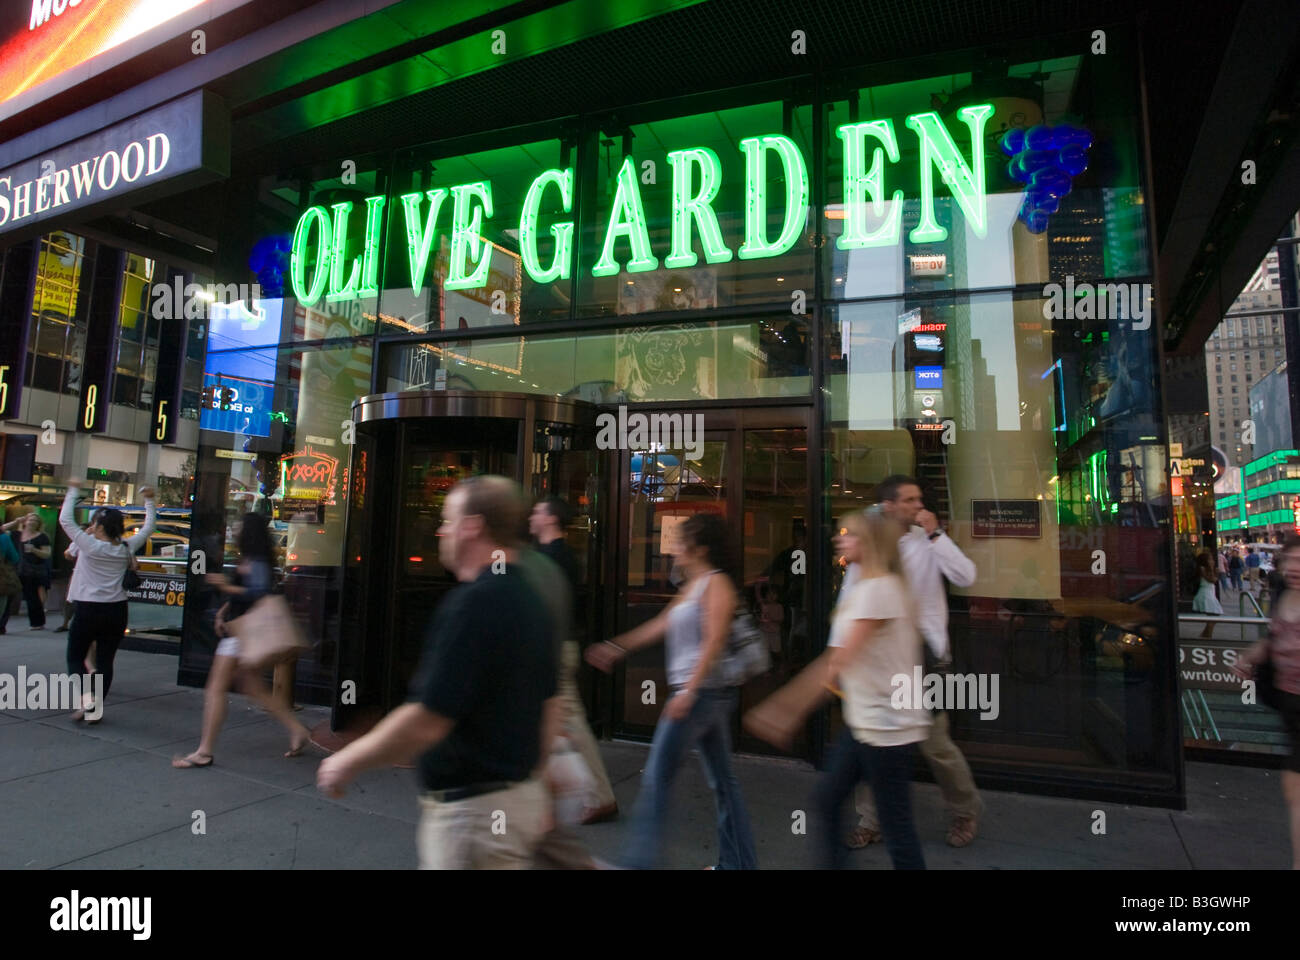 A Times Square Branch Of The Olive Garden Restaurant Chain Stock